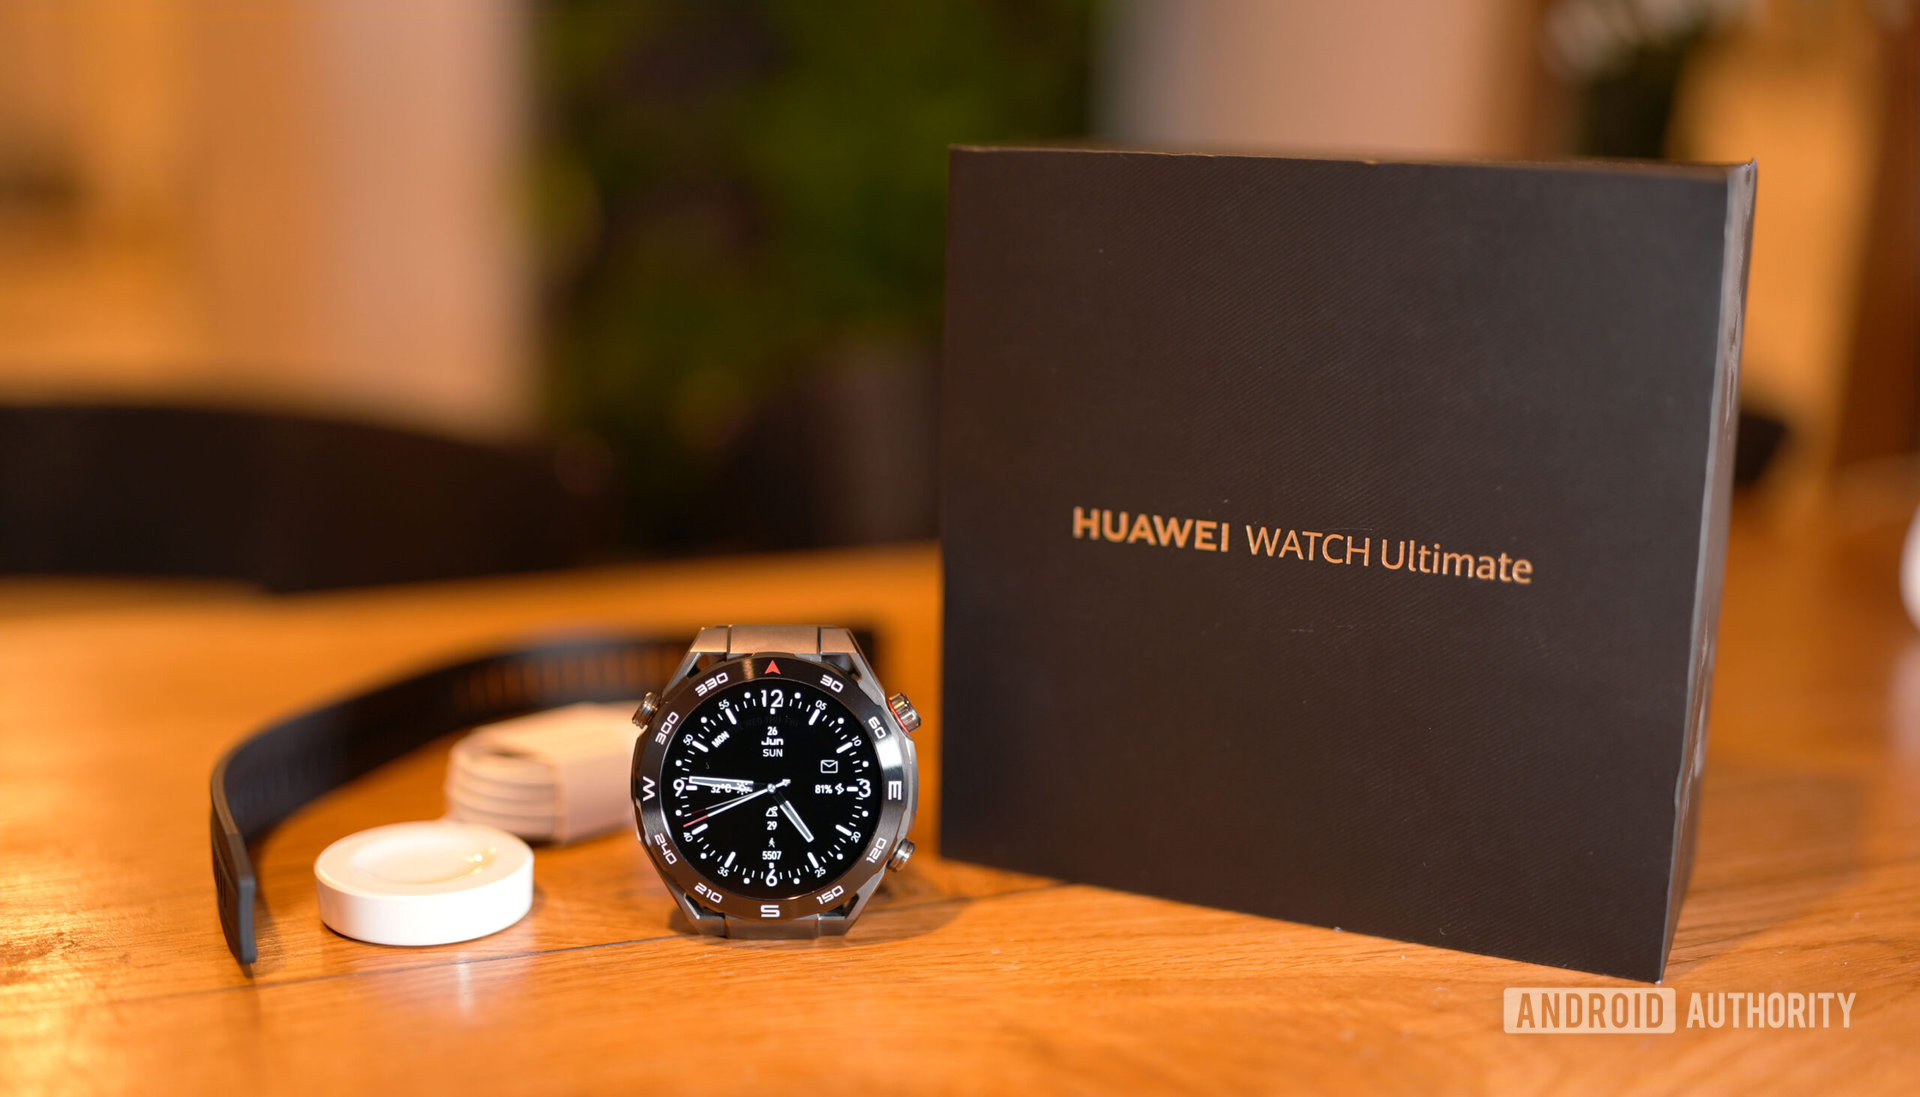 Huawei Watch Ultimate with box contents